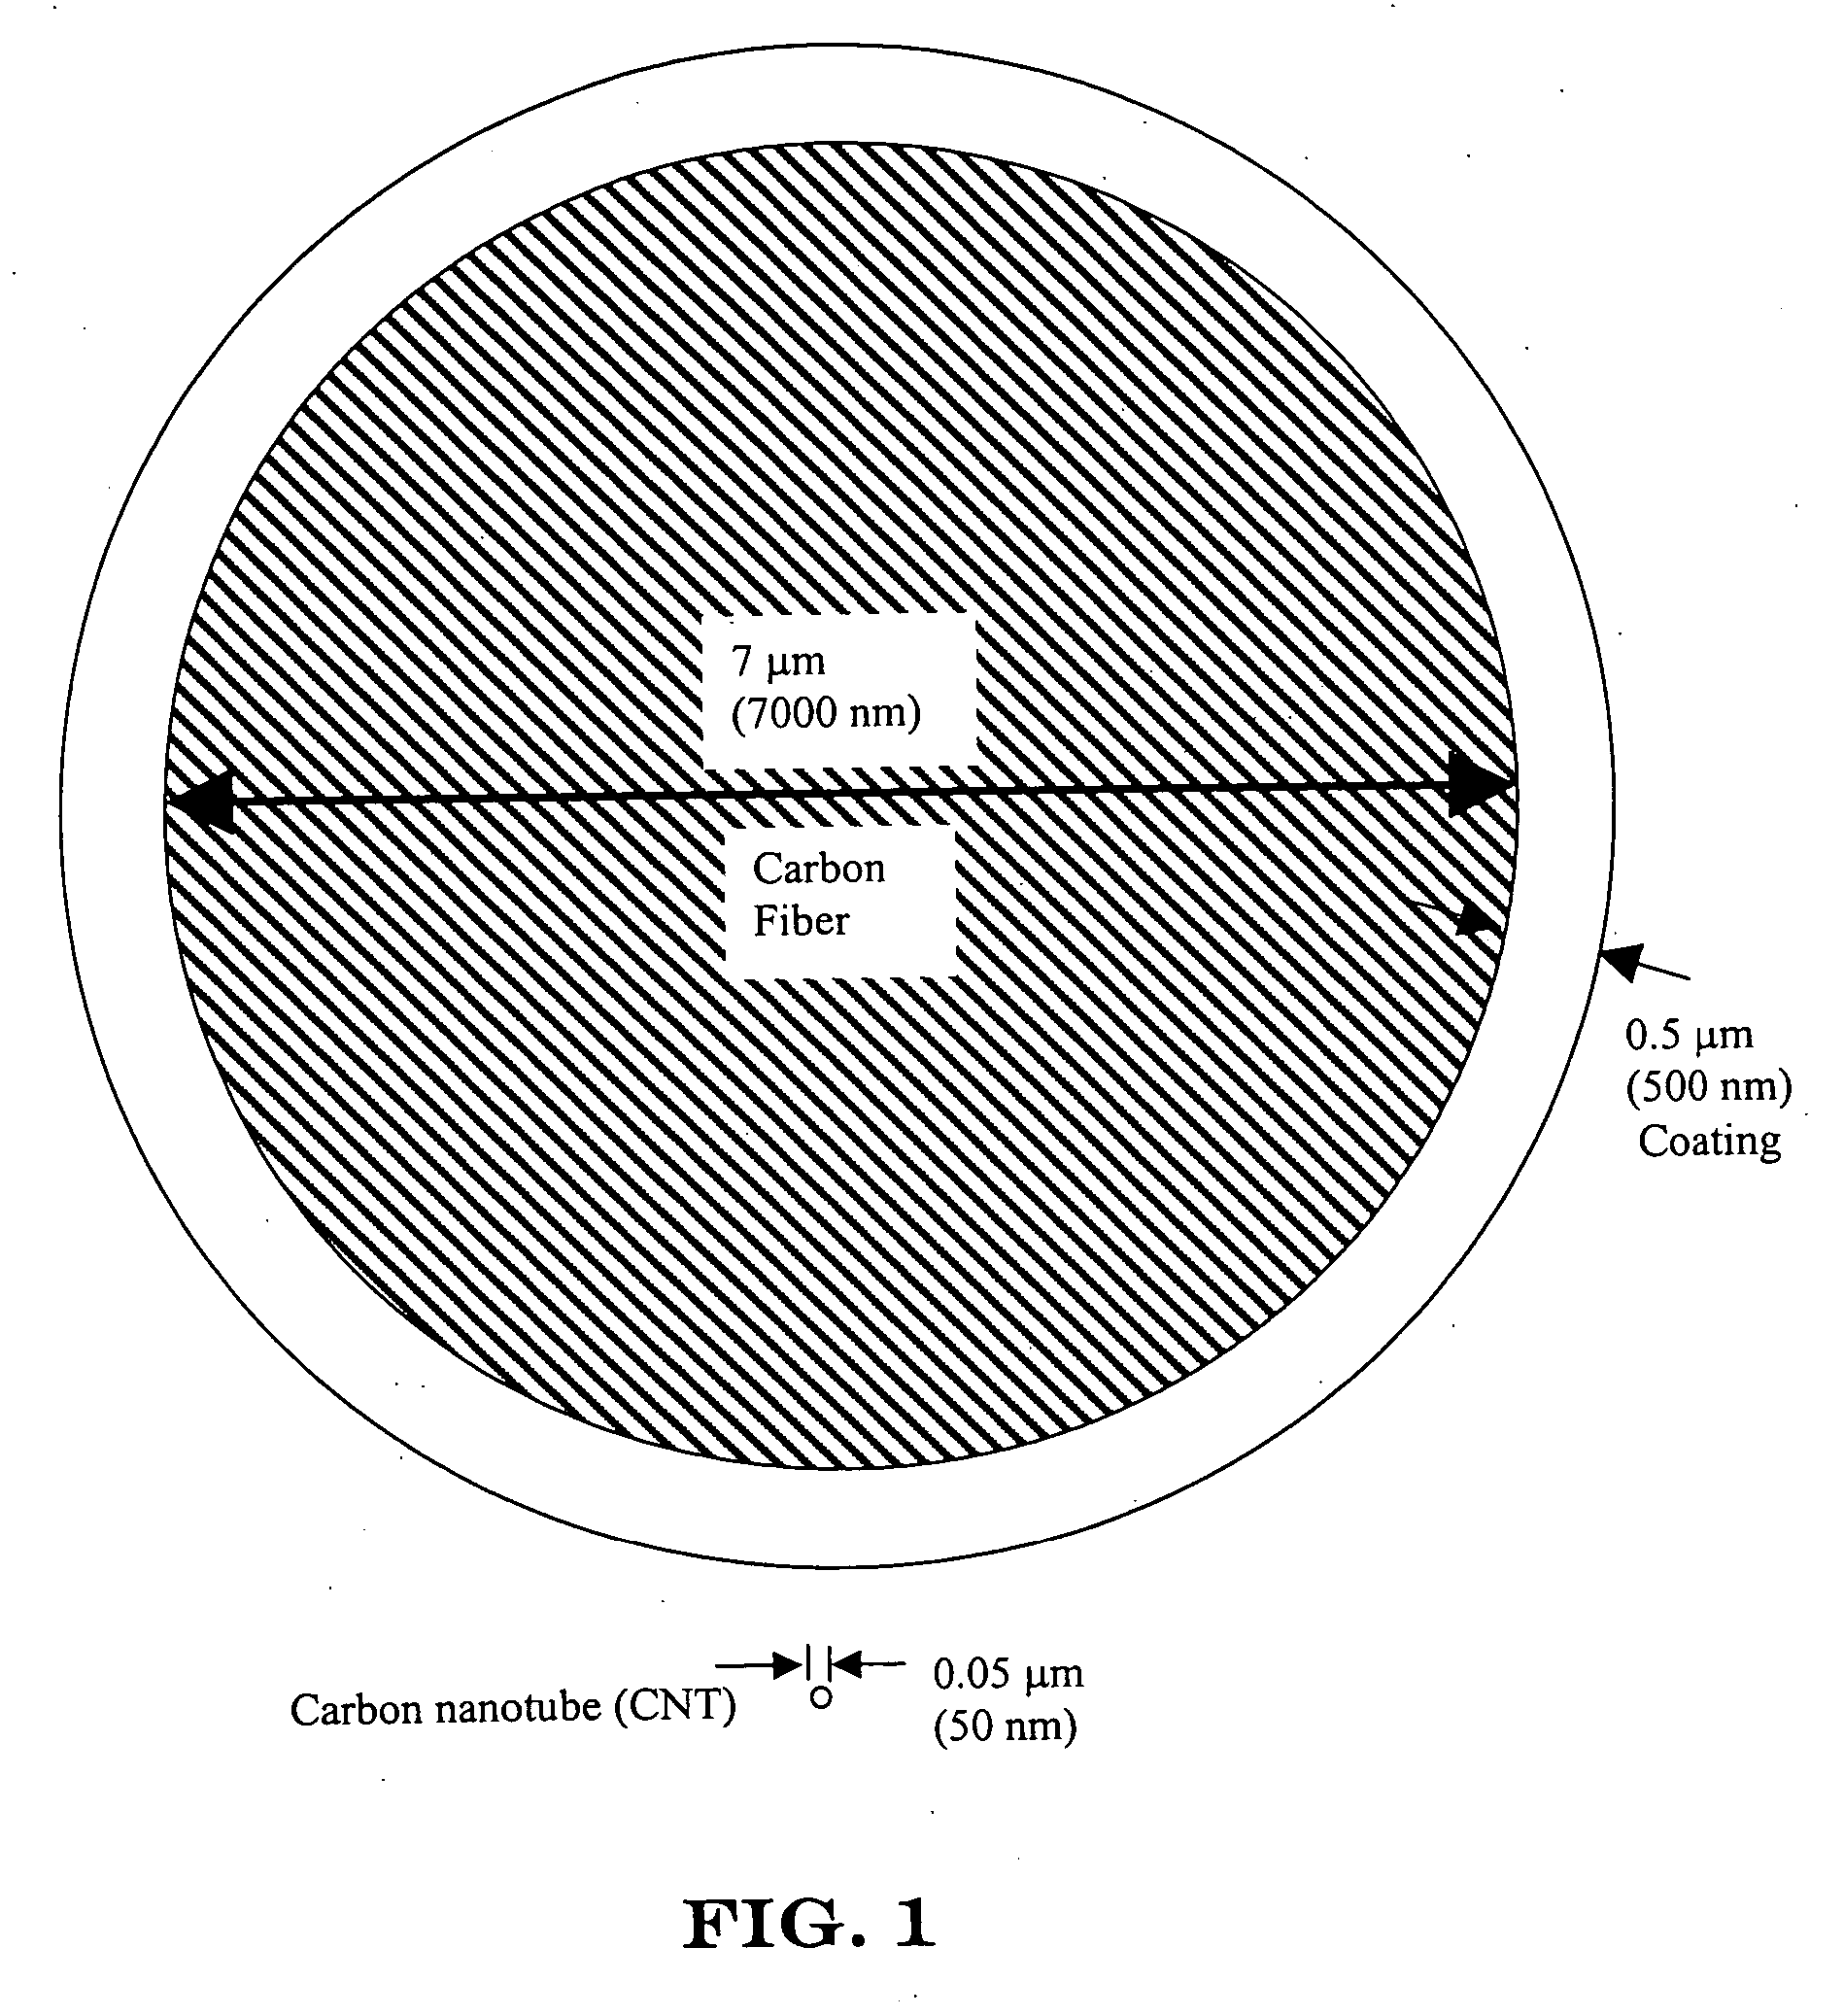 Nanotube-containing composite bodies, and methods for making same